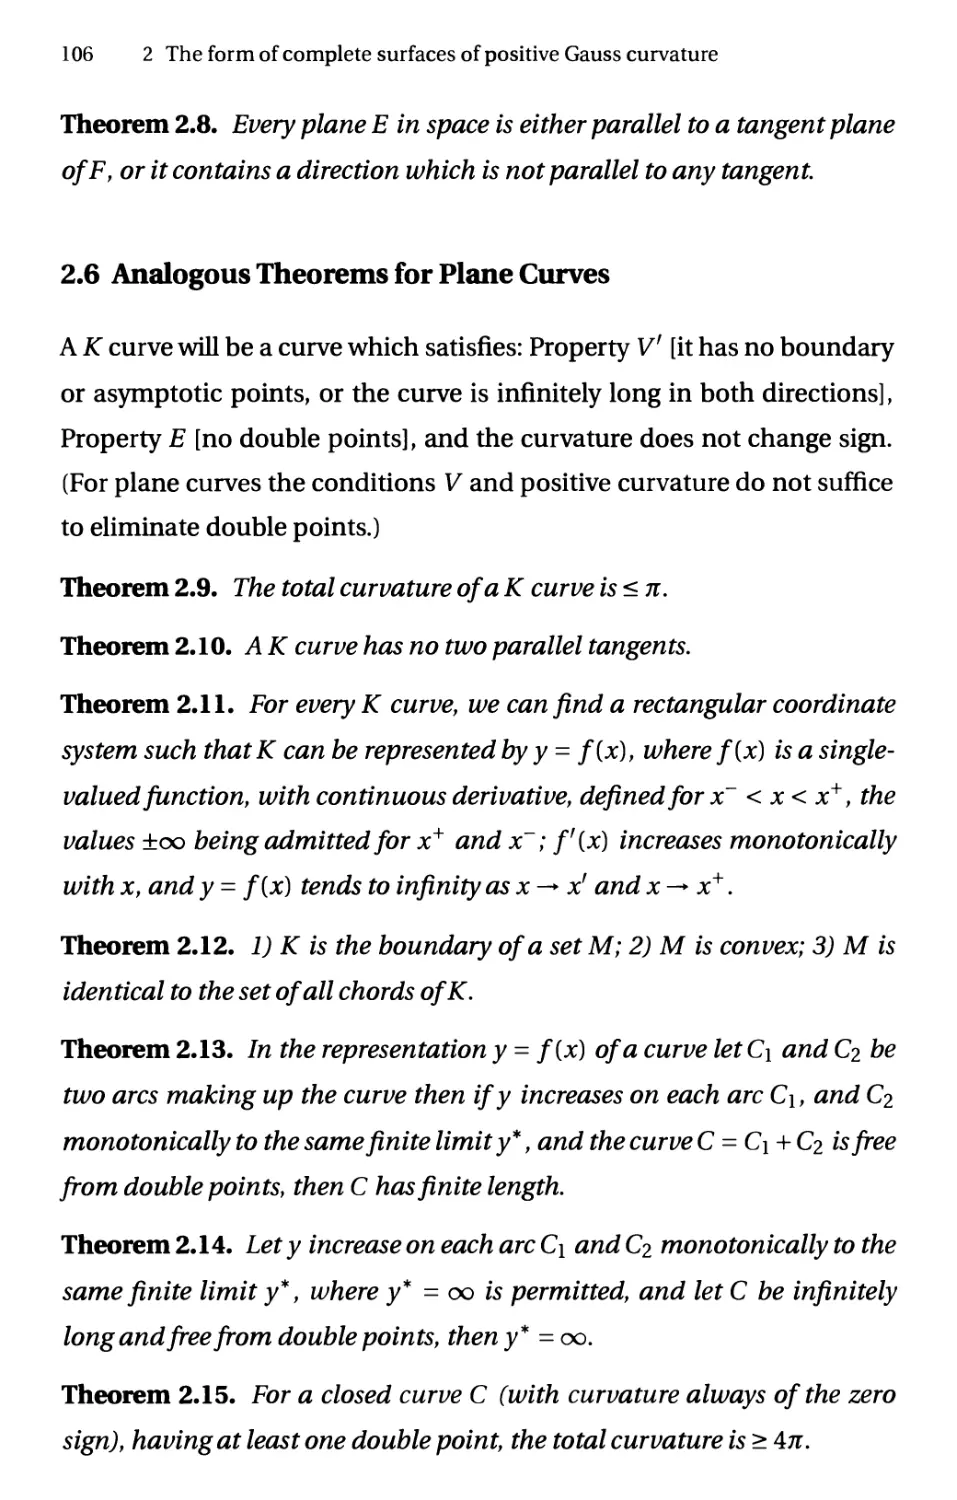 2.6 Analogous Theorems for Plane Curves